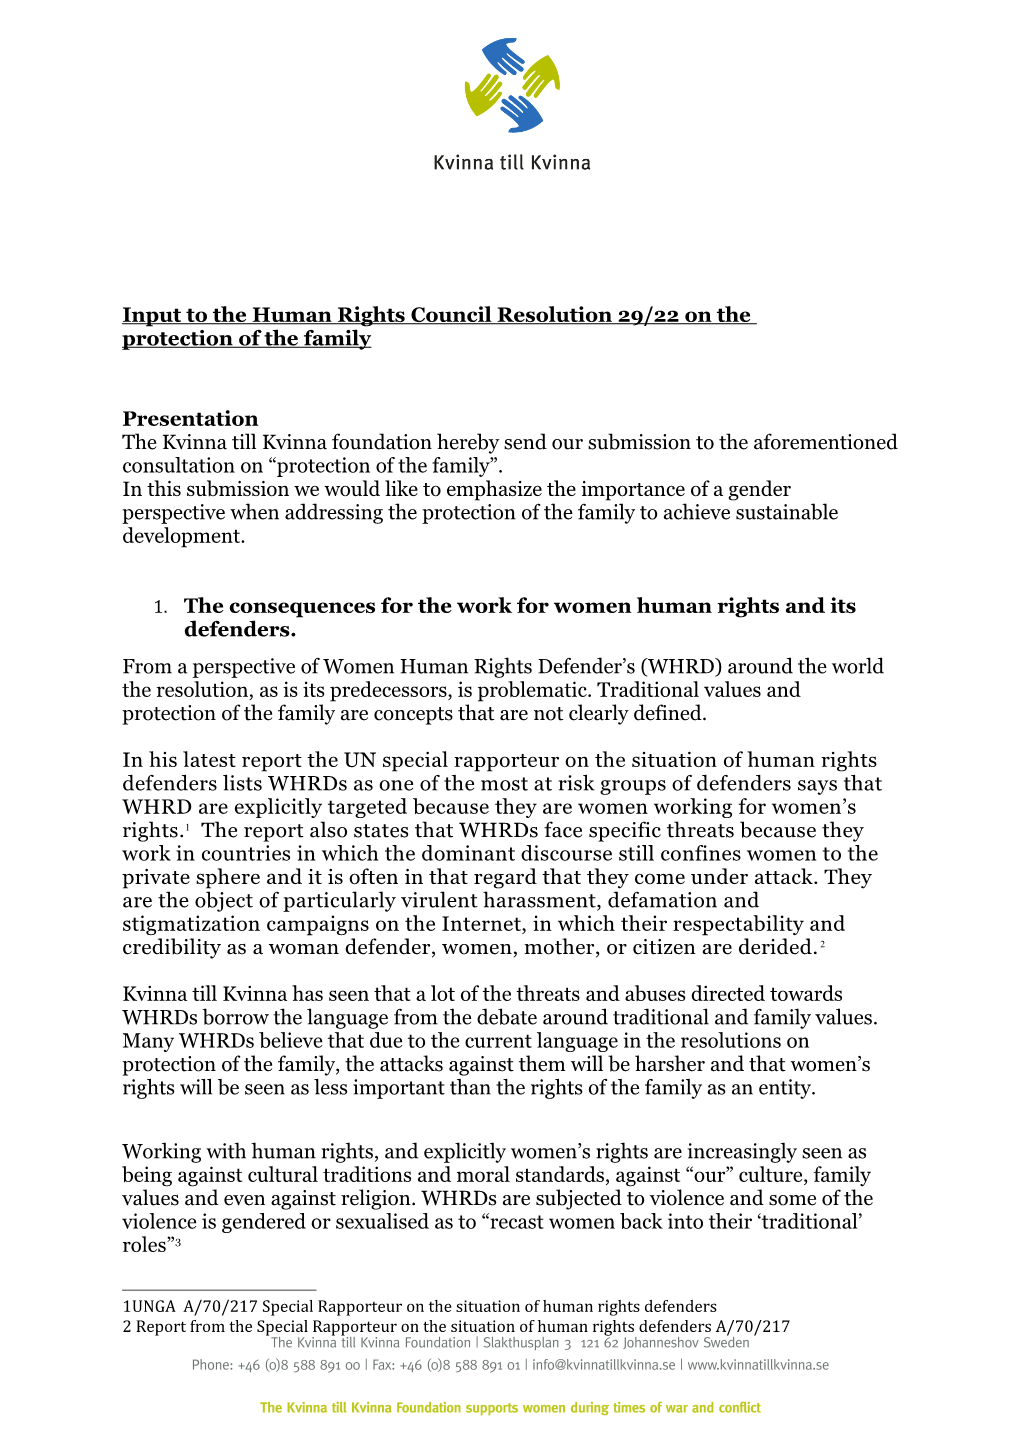 Input to the Human Rights Council Resolution 29/22 on the Protection of the Family